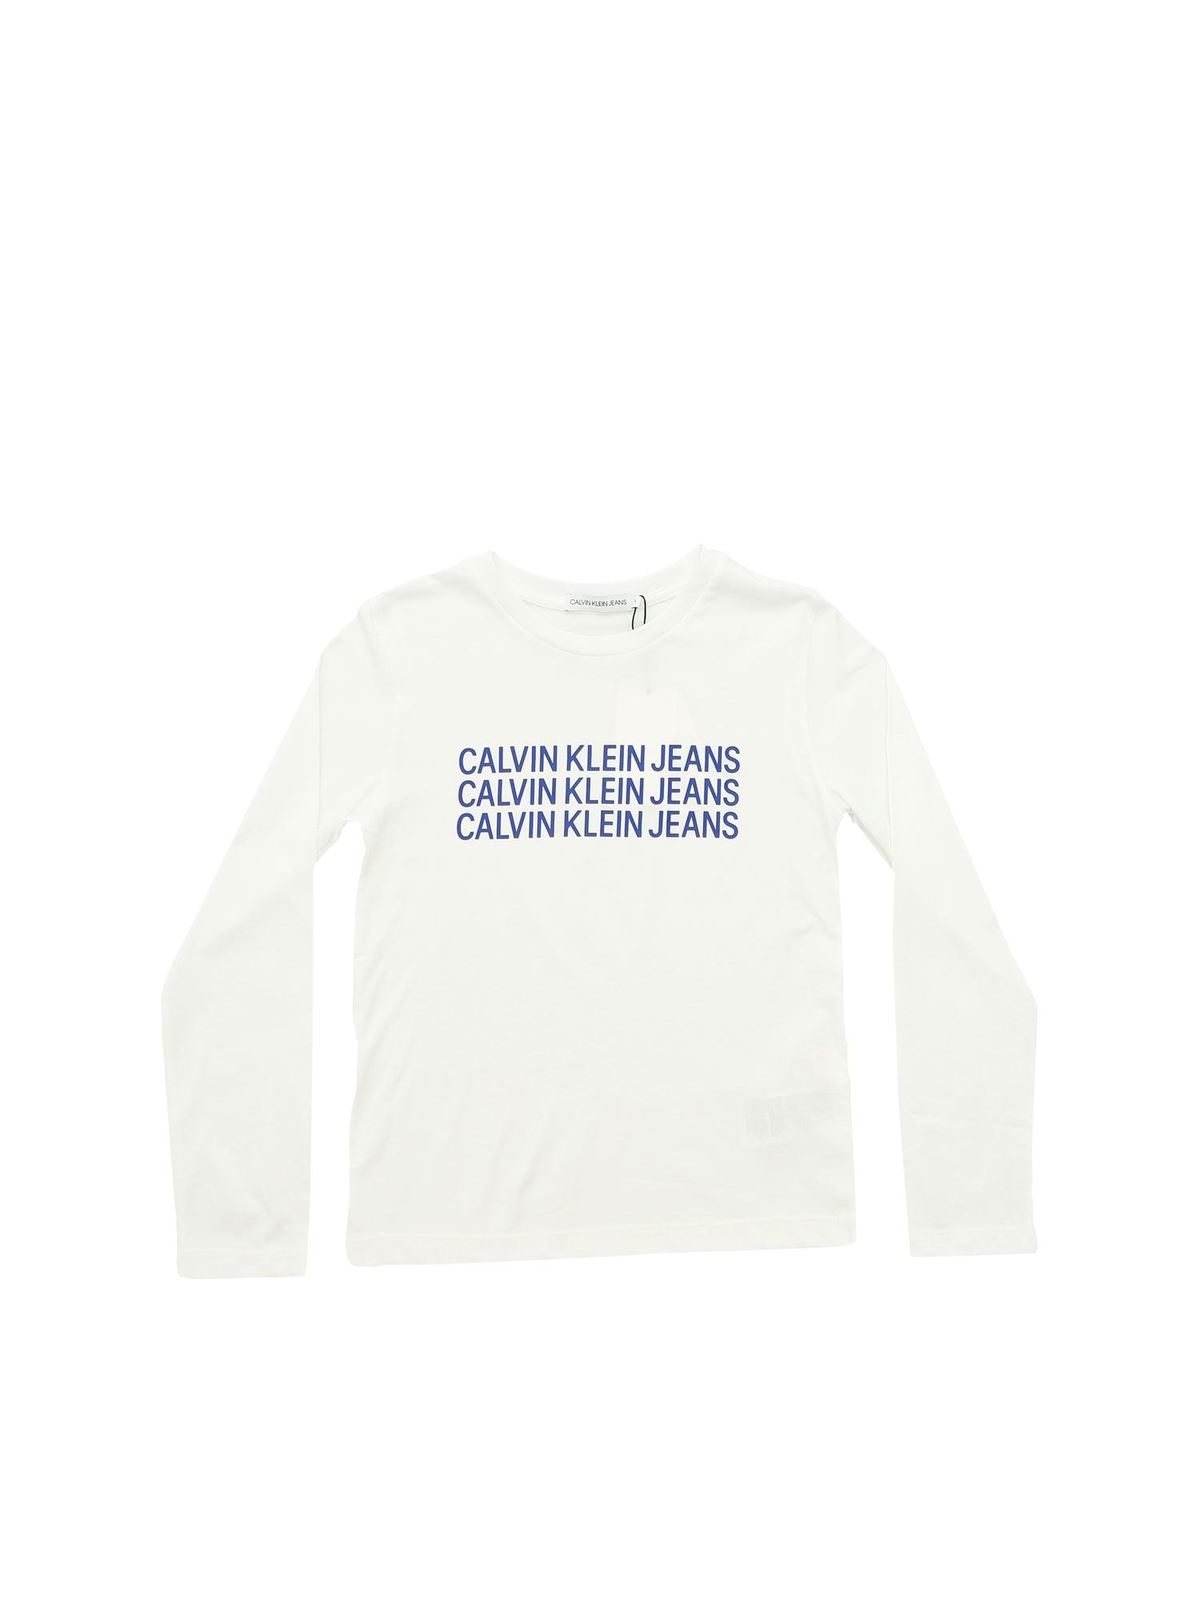 Calvin Klein White Long Sleeve Shirt Sale Online, UP TO 59% OFF 